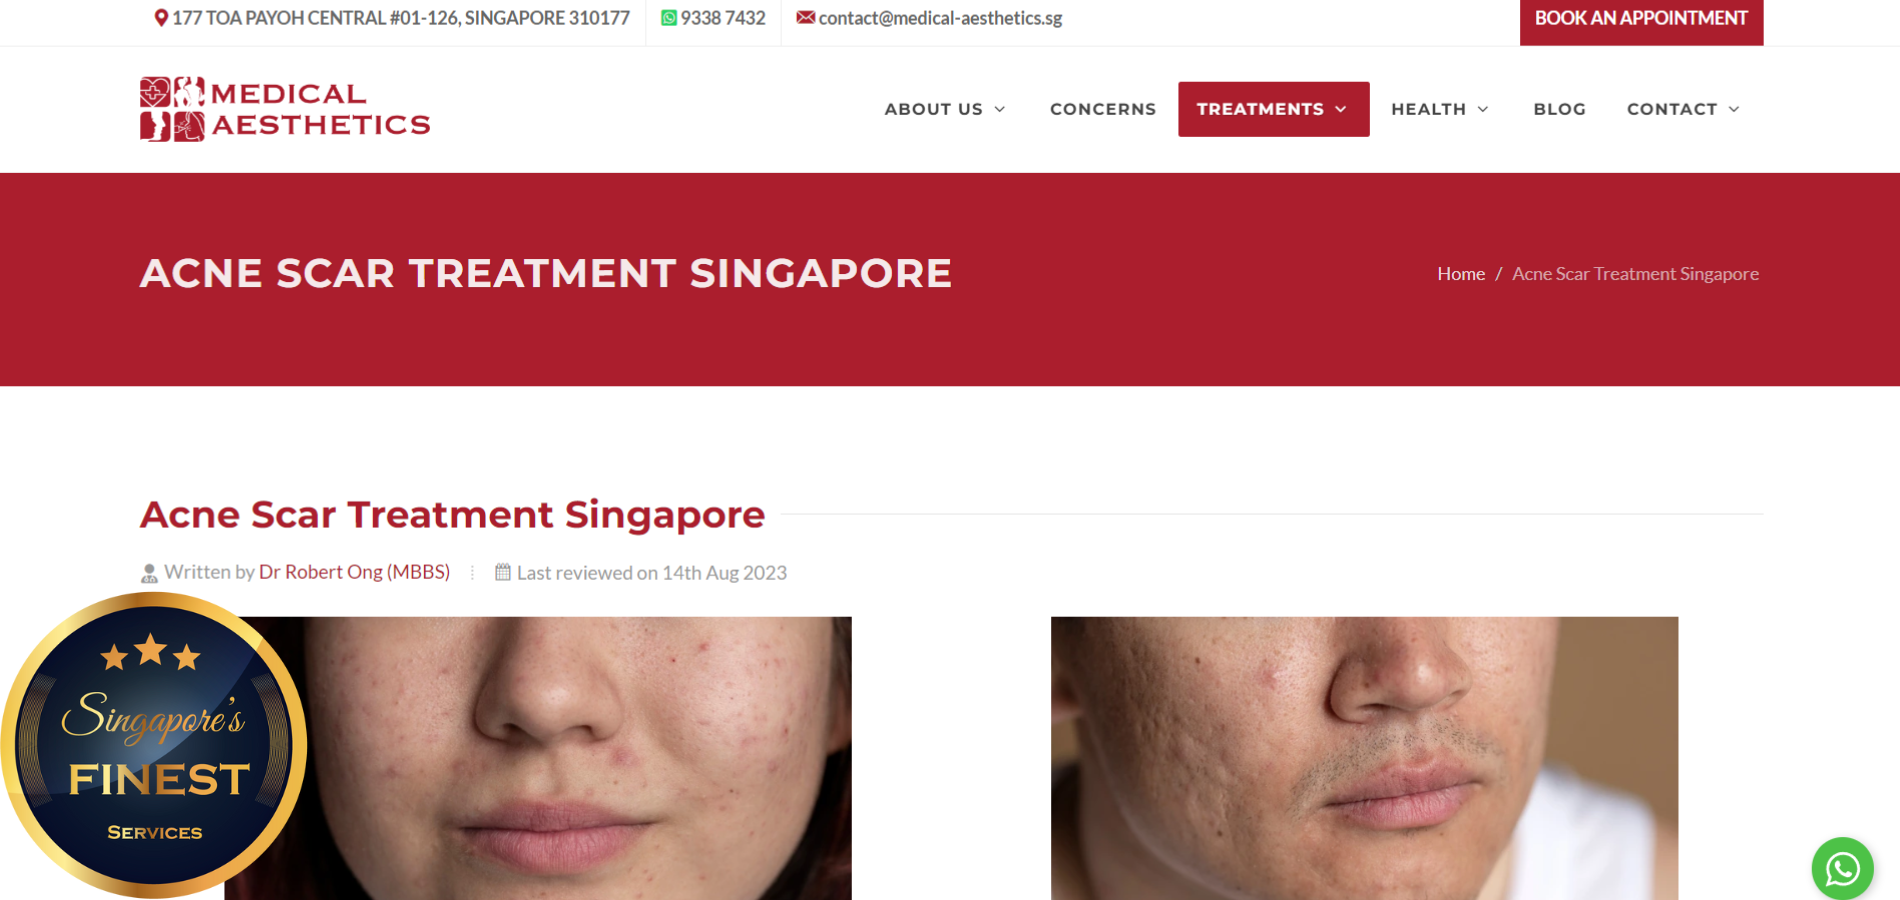 The Finest Clinics for Acne Scar Treatments in Singapore